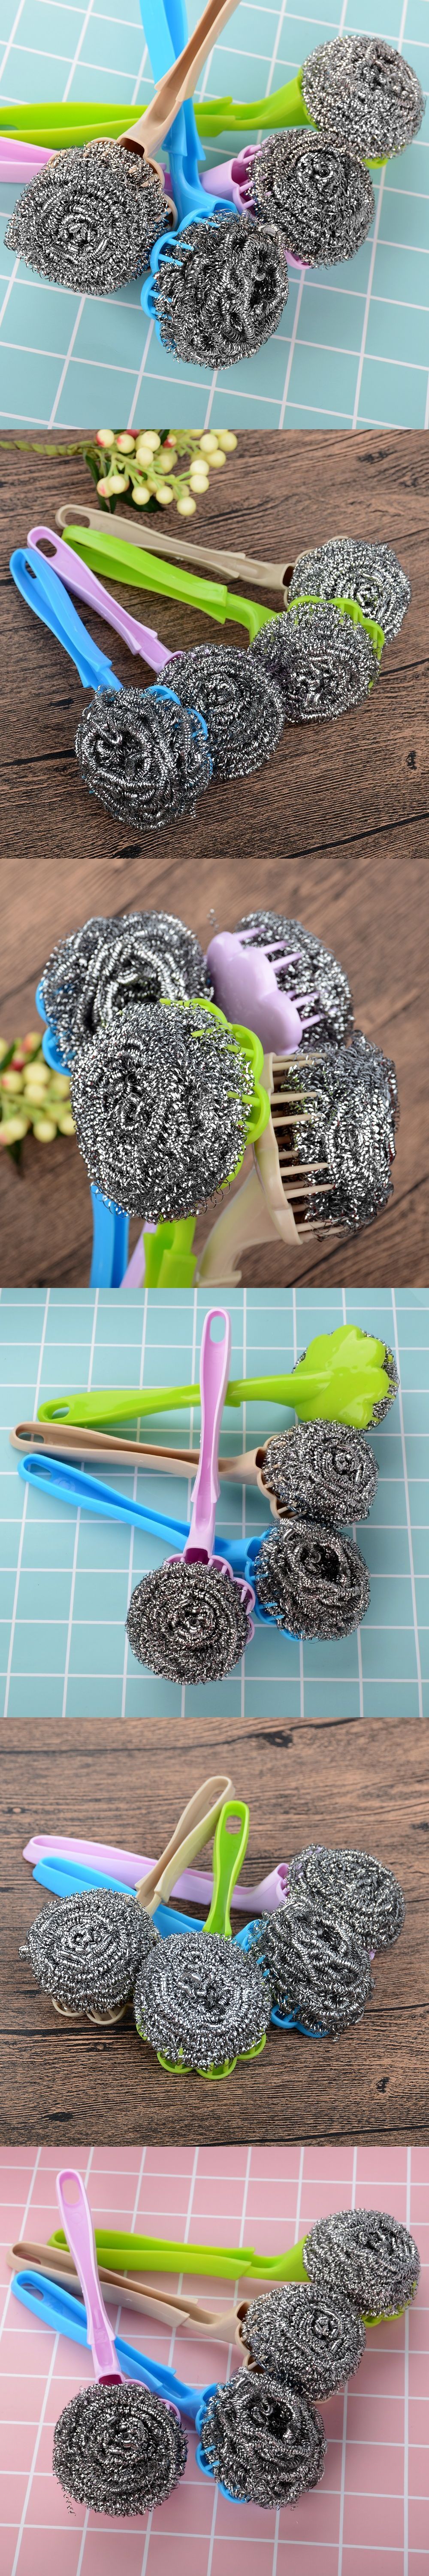 Kitchen Stainless Steel Wool Ball Brush With Long Handle Kitchen ...